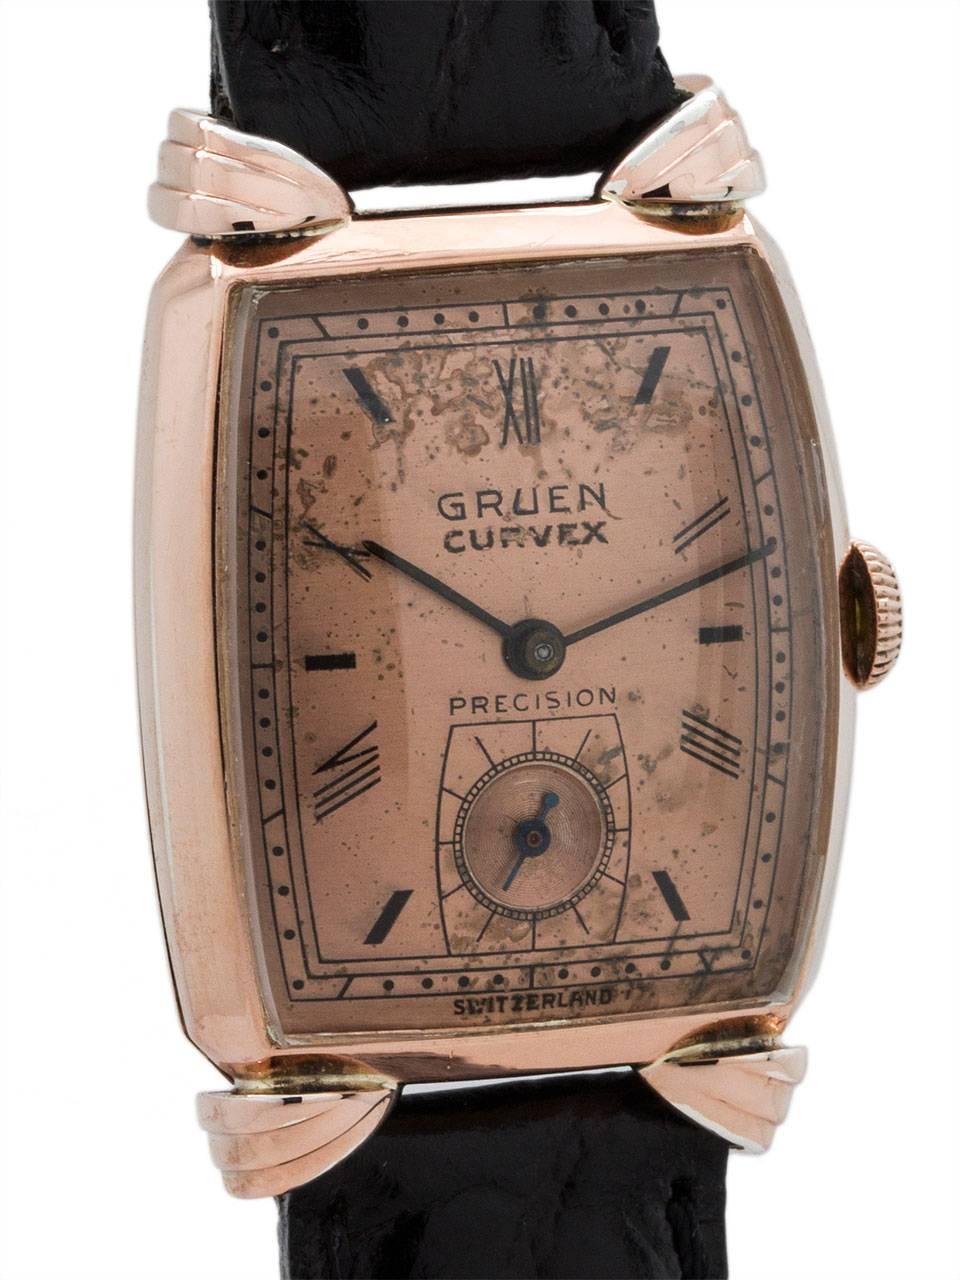 
Man’s vintage PGF Gruen Veri-Thin manual wind dress model circa 1940’s. Featuring a medium size 23 x 34mm tonneau shaped case with fluted angled lugs and with original patina’d original salmon dial with black printed Roman numerals and thin black